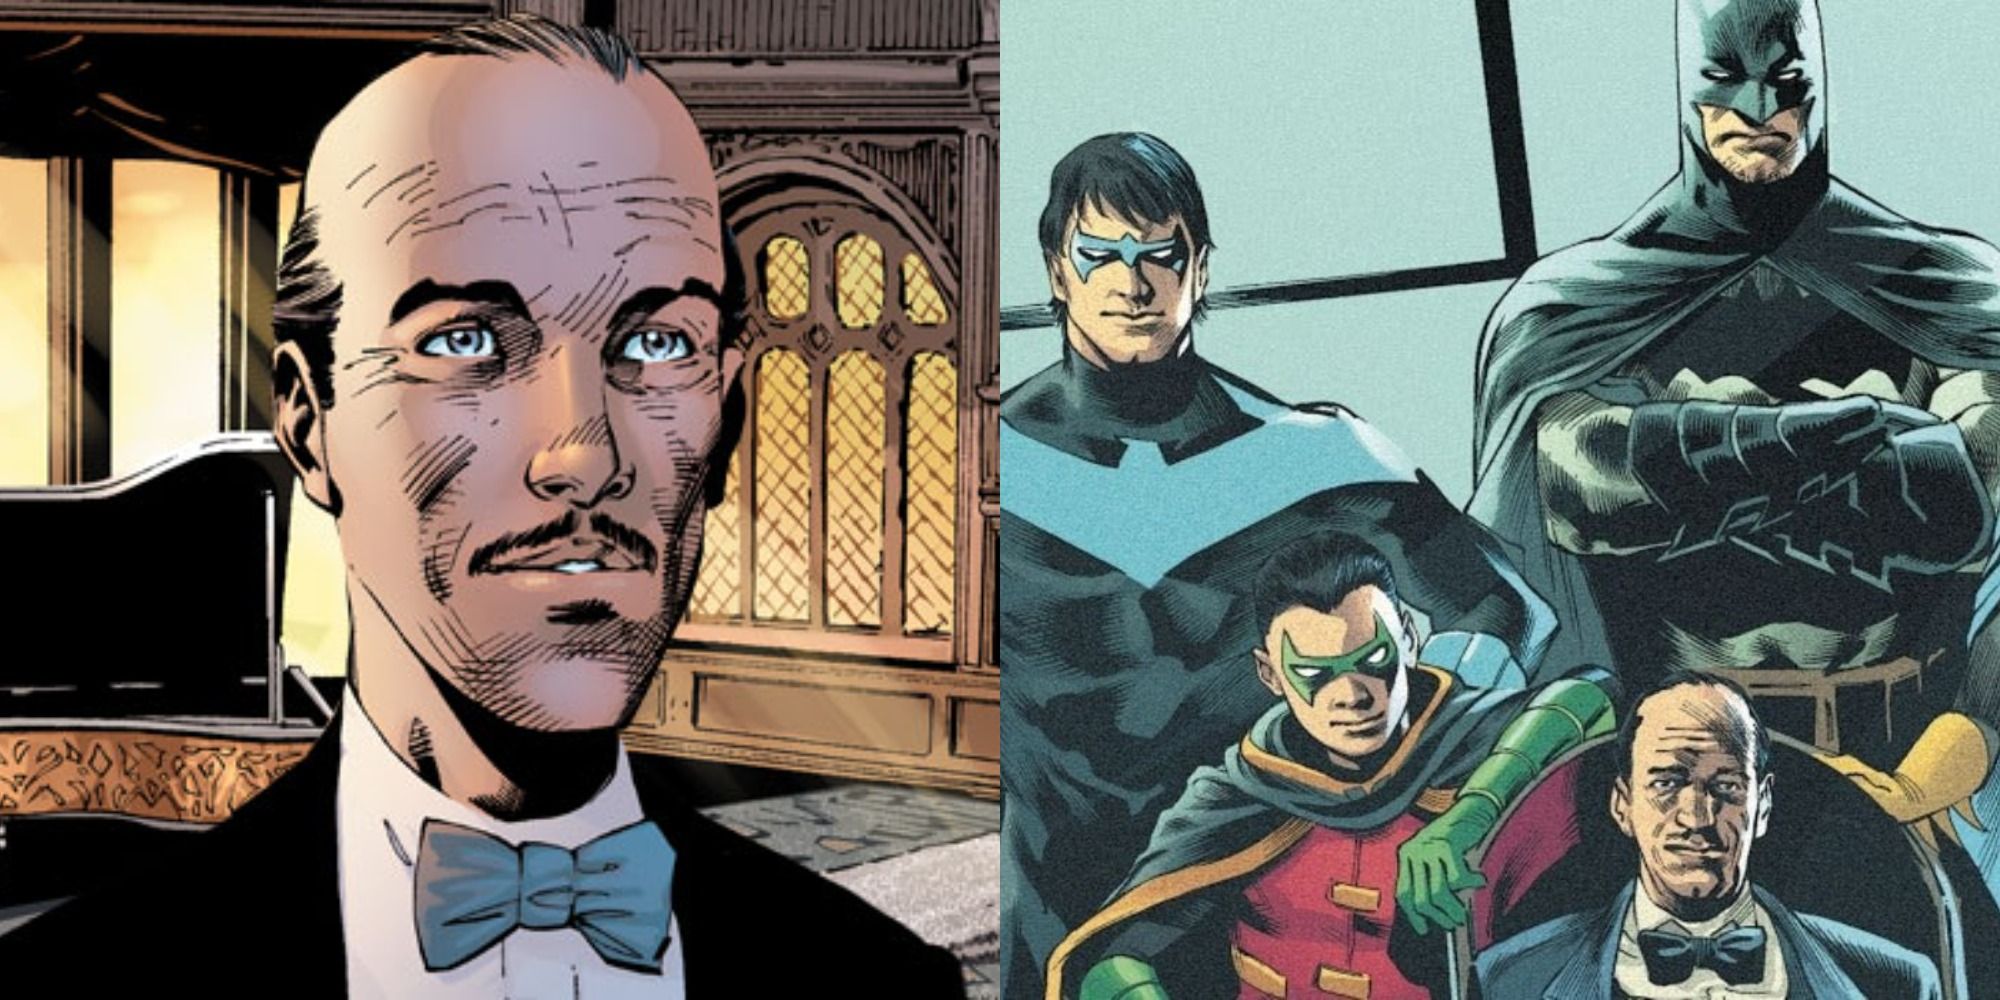 Split image of Alfred Pennyworth from the Batman comics.